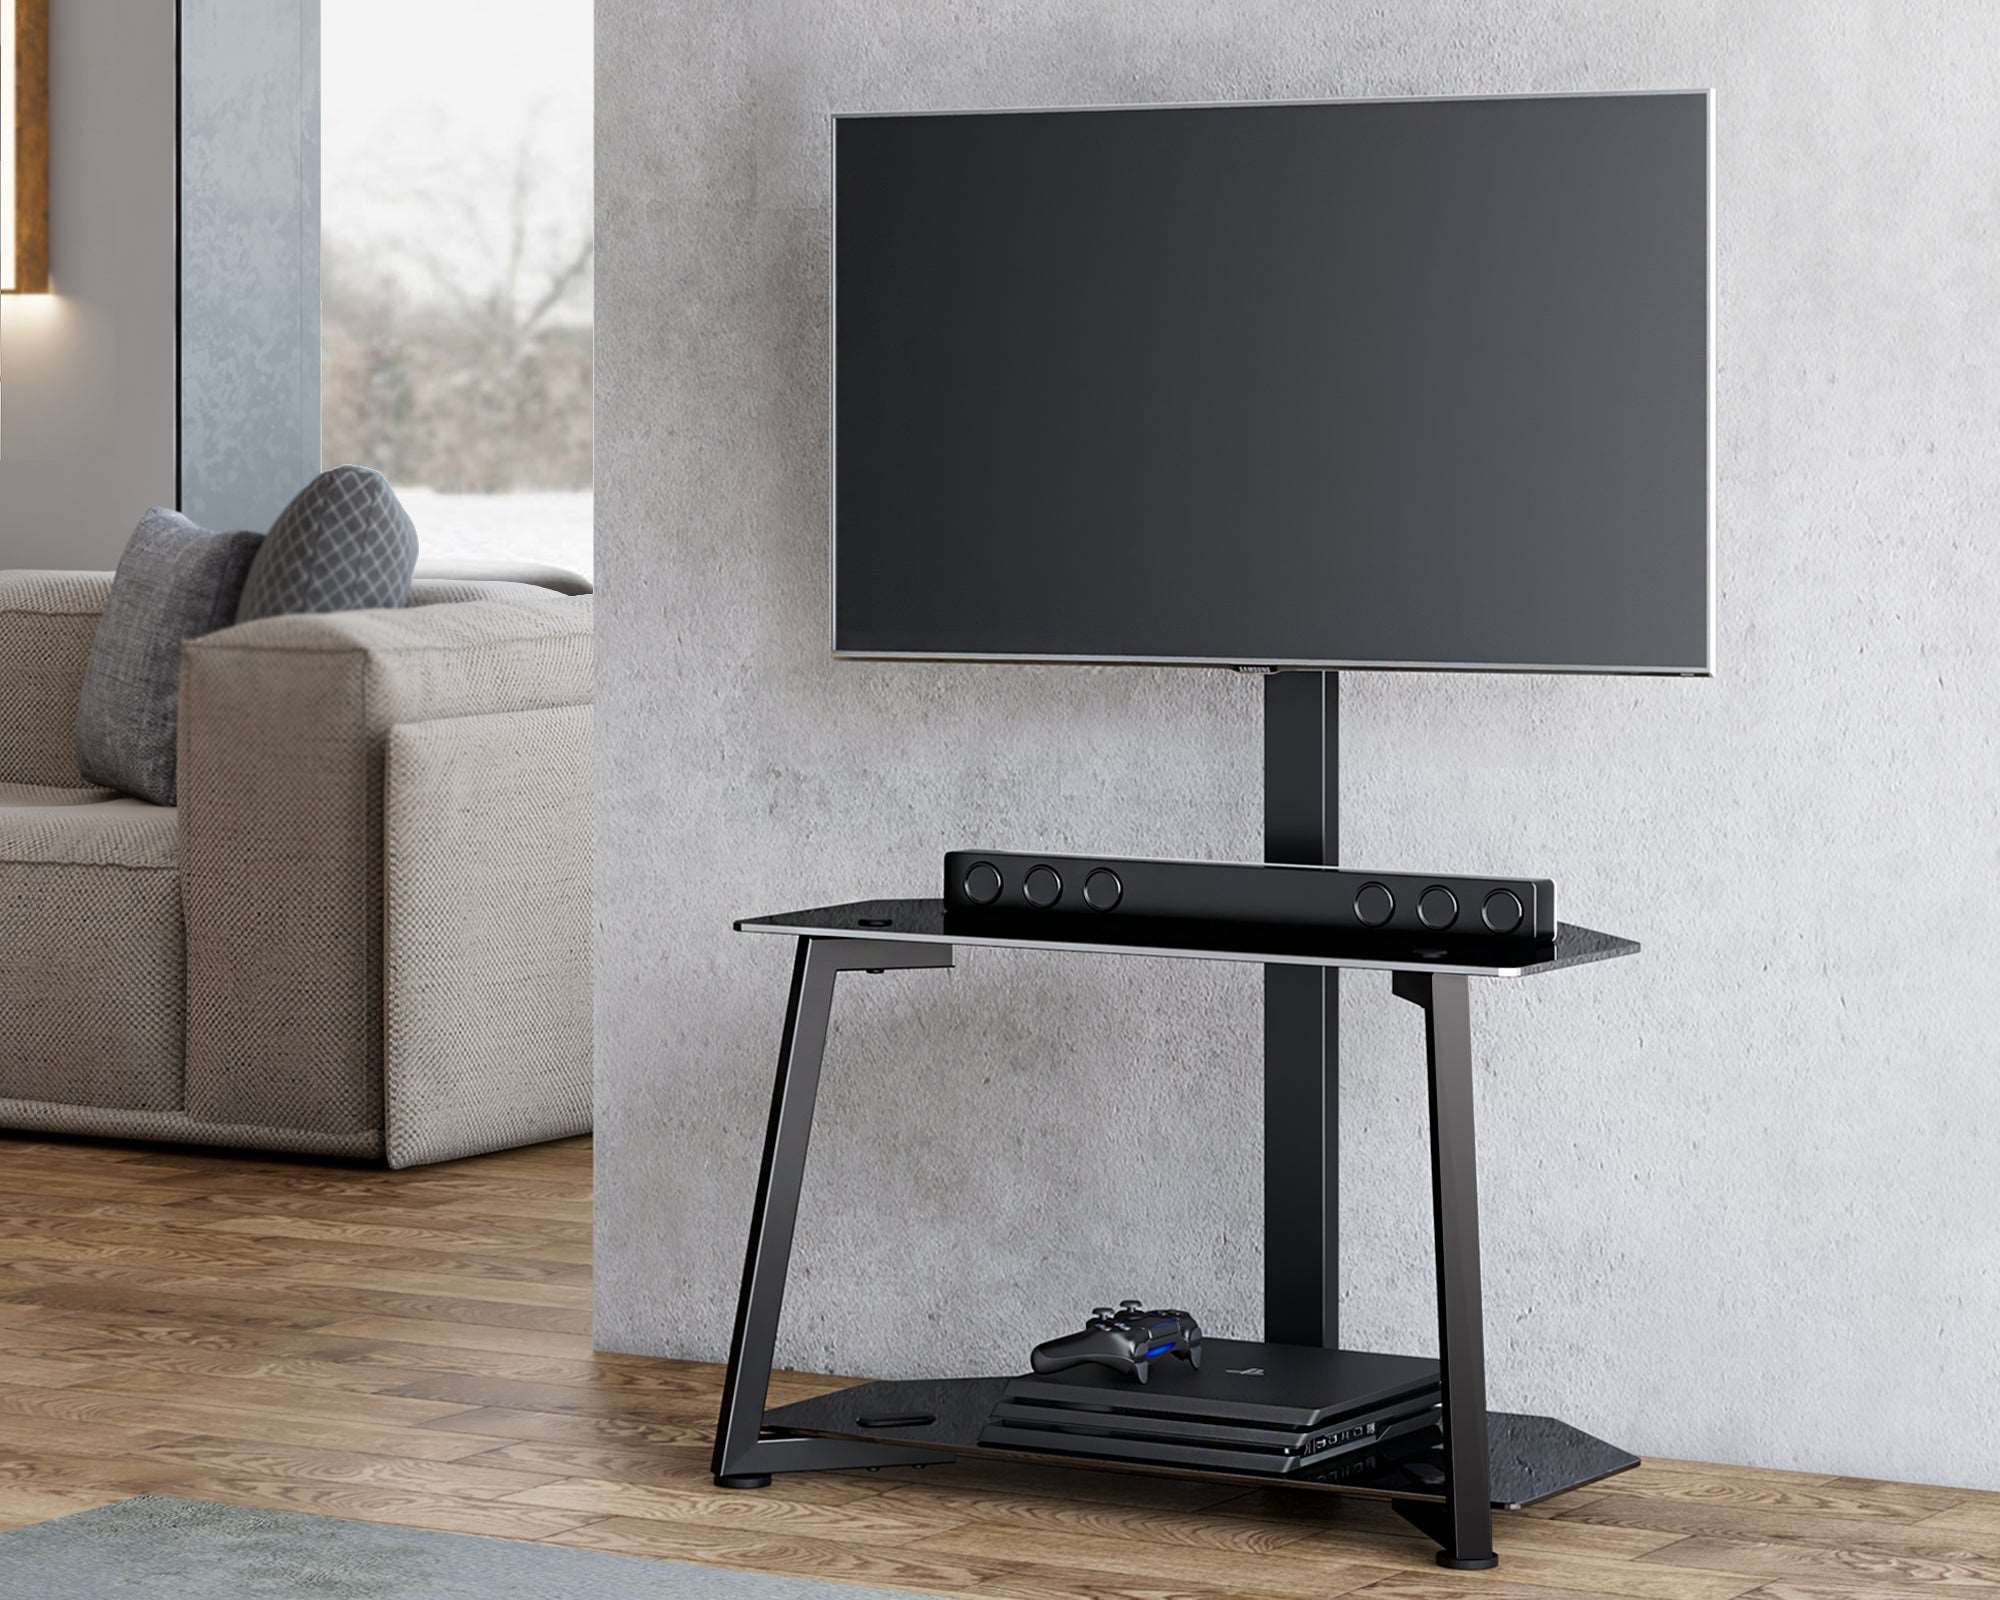 2-Tiers TV Stand/Base for 23-55 Inch TVs